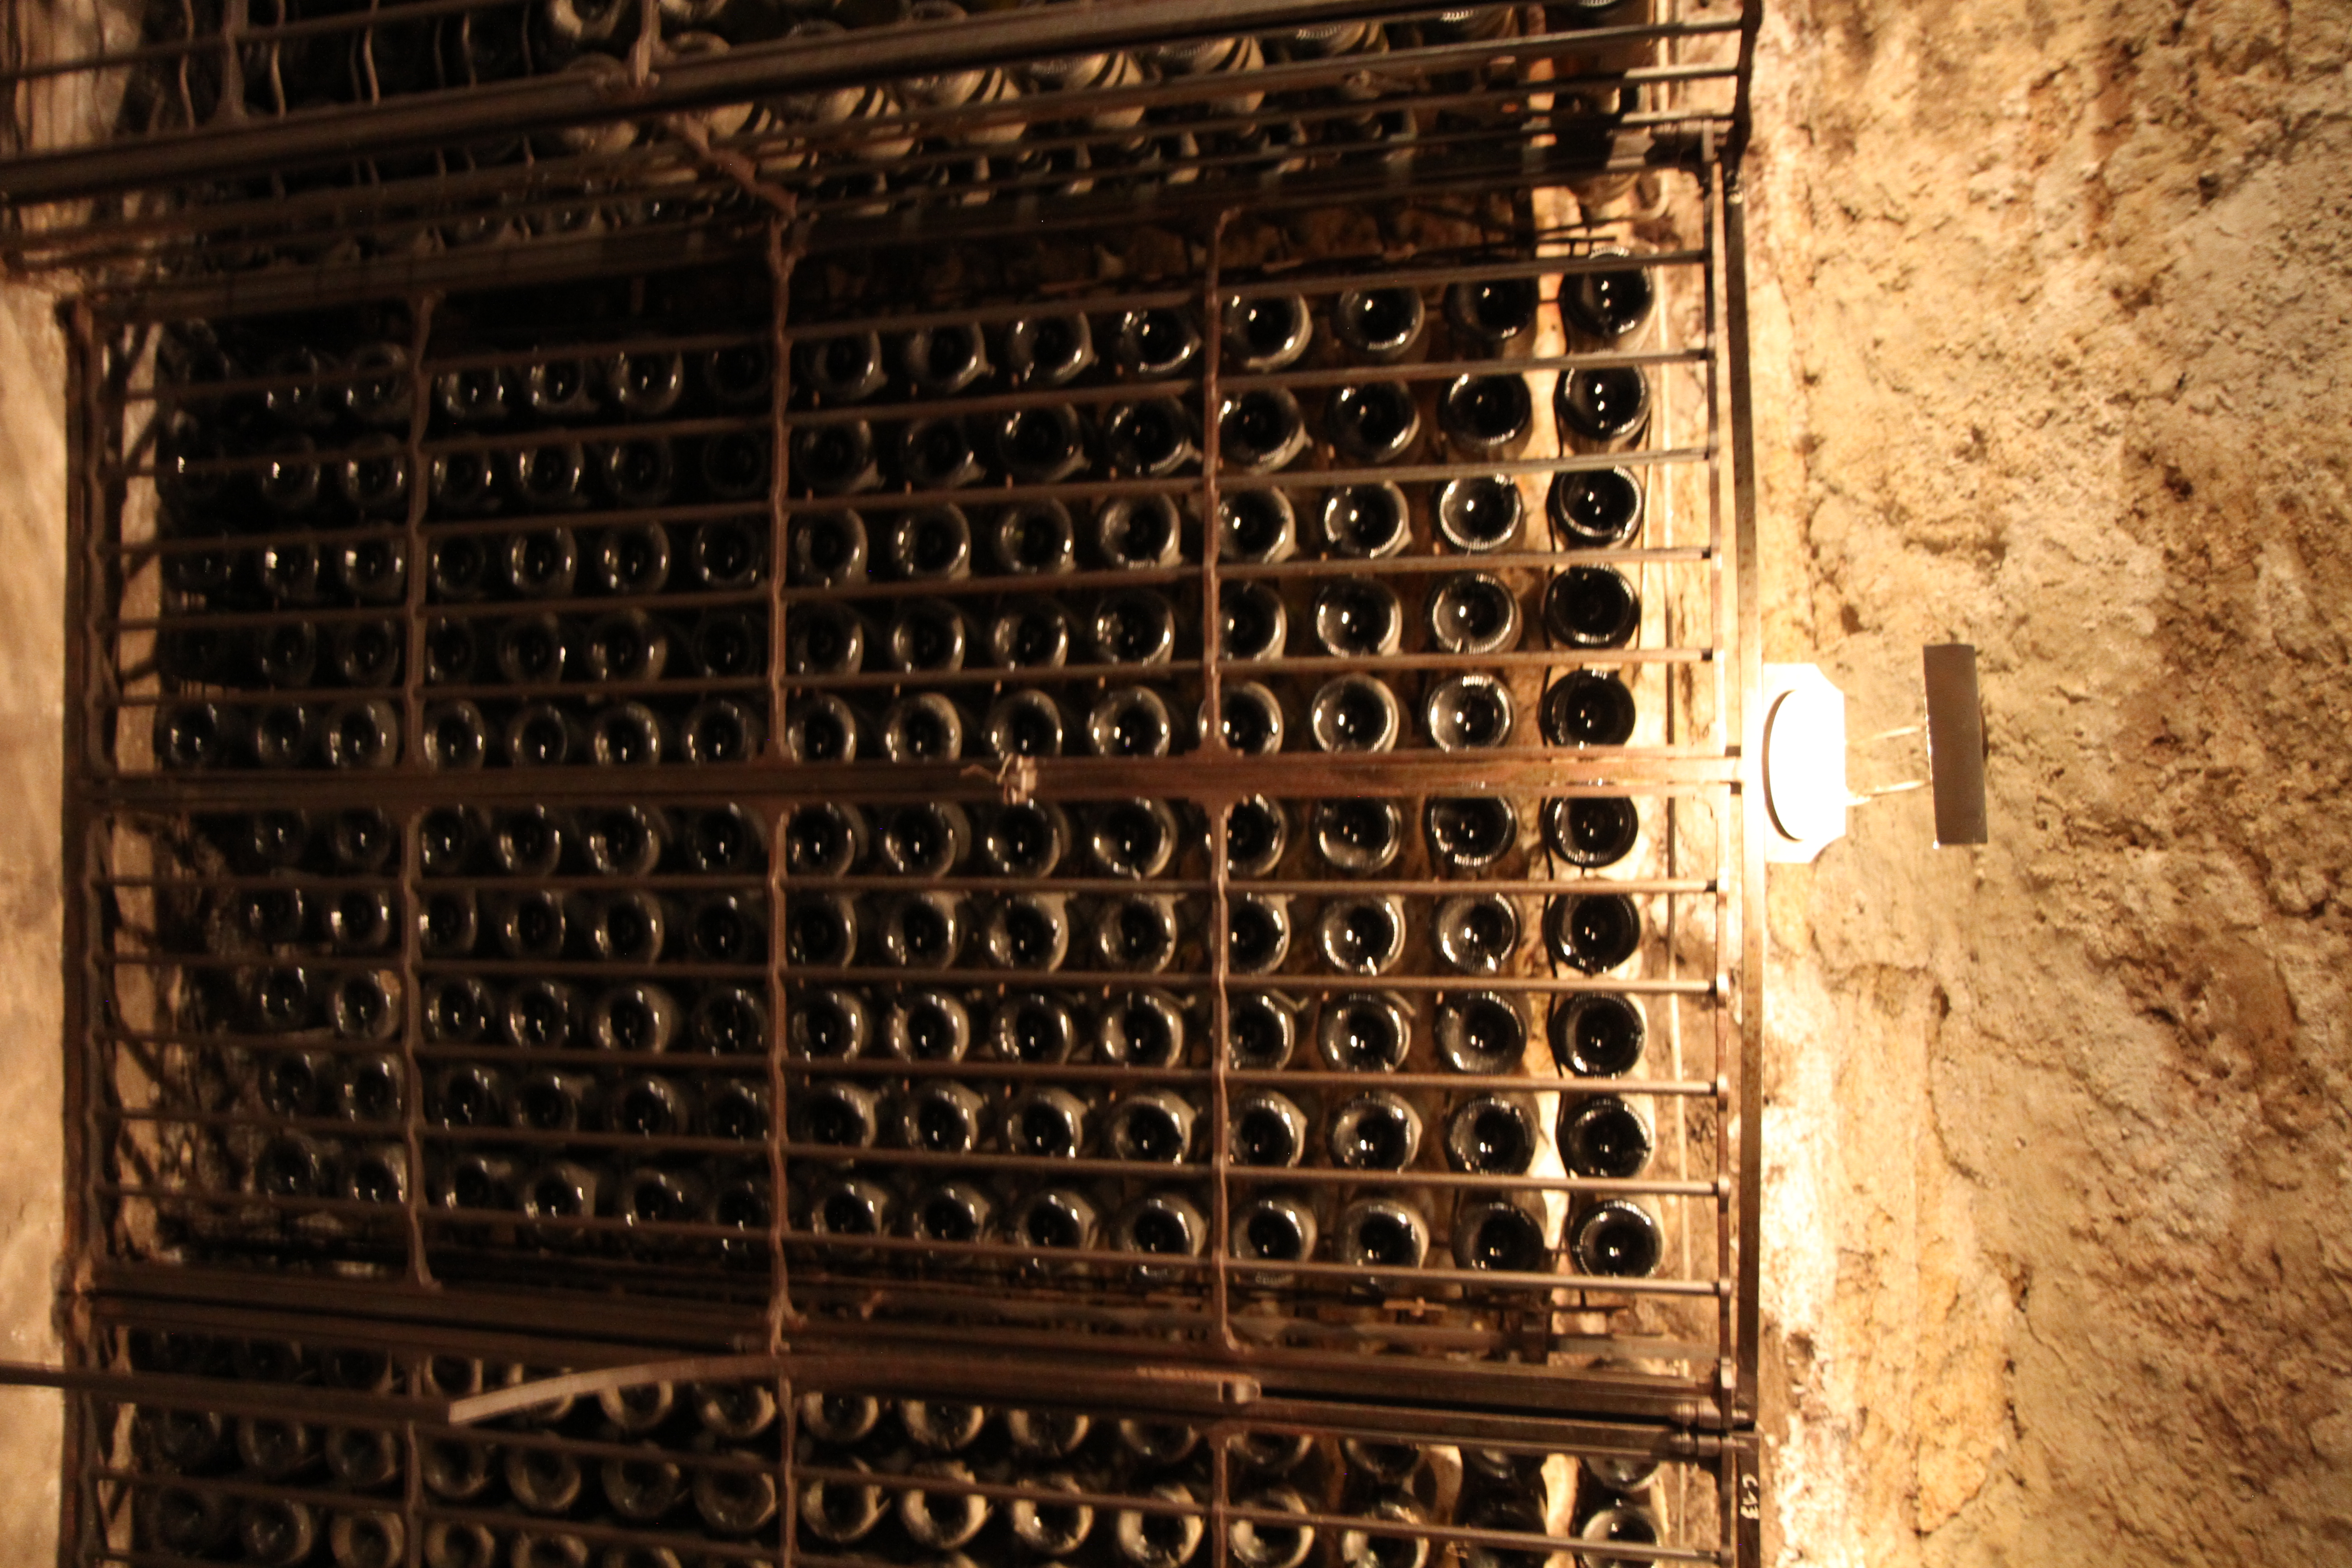 A portion of the cellars hold bottles for special customers (restaurants or people). This block was marked for La Bastide de Gordes, where we'd stayed the prior 2 nights!